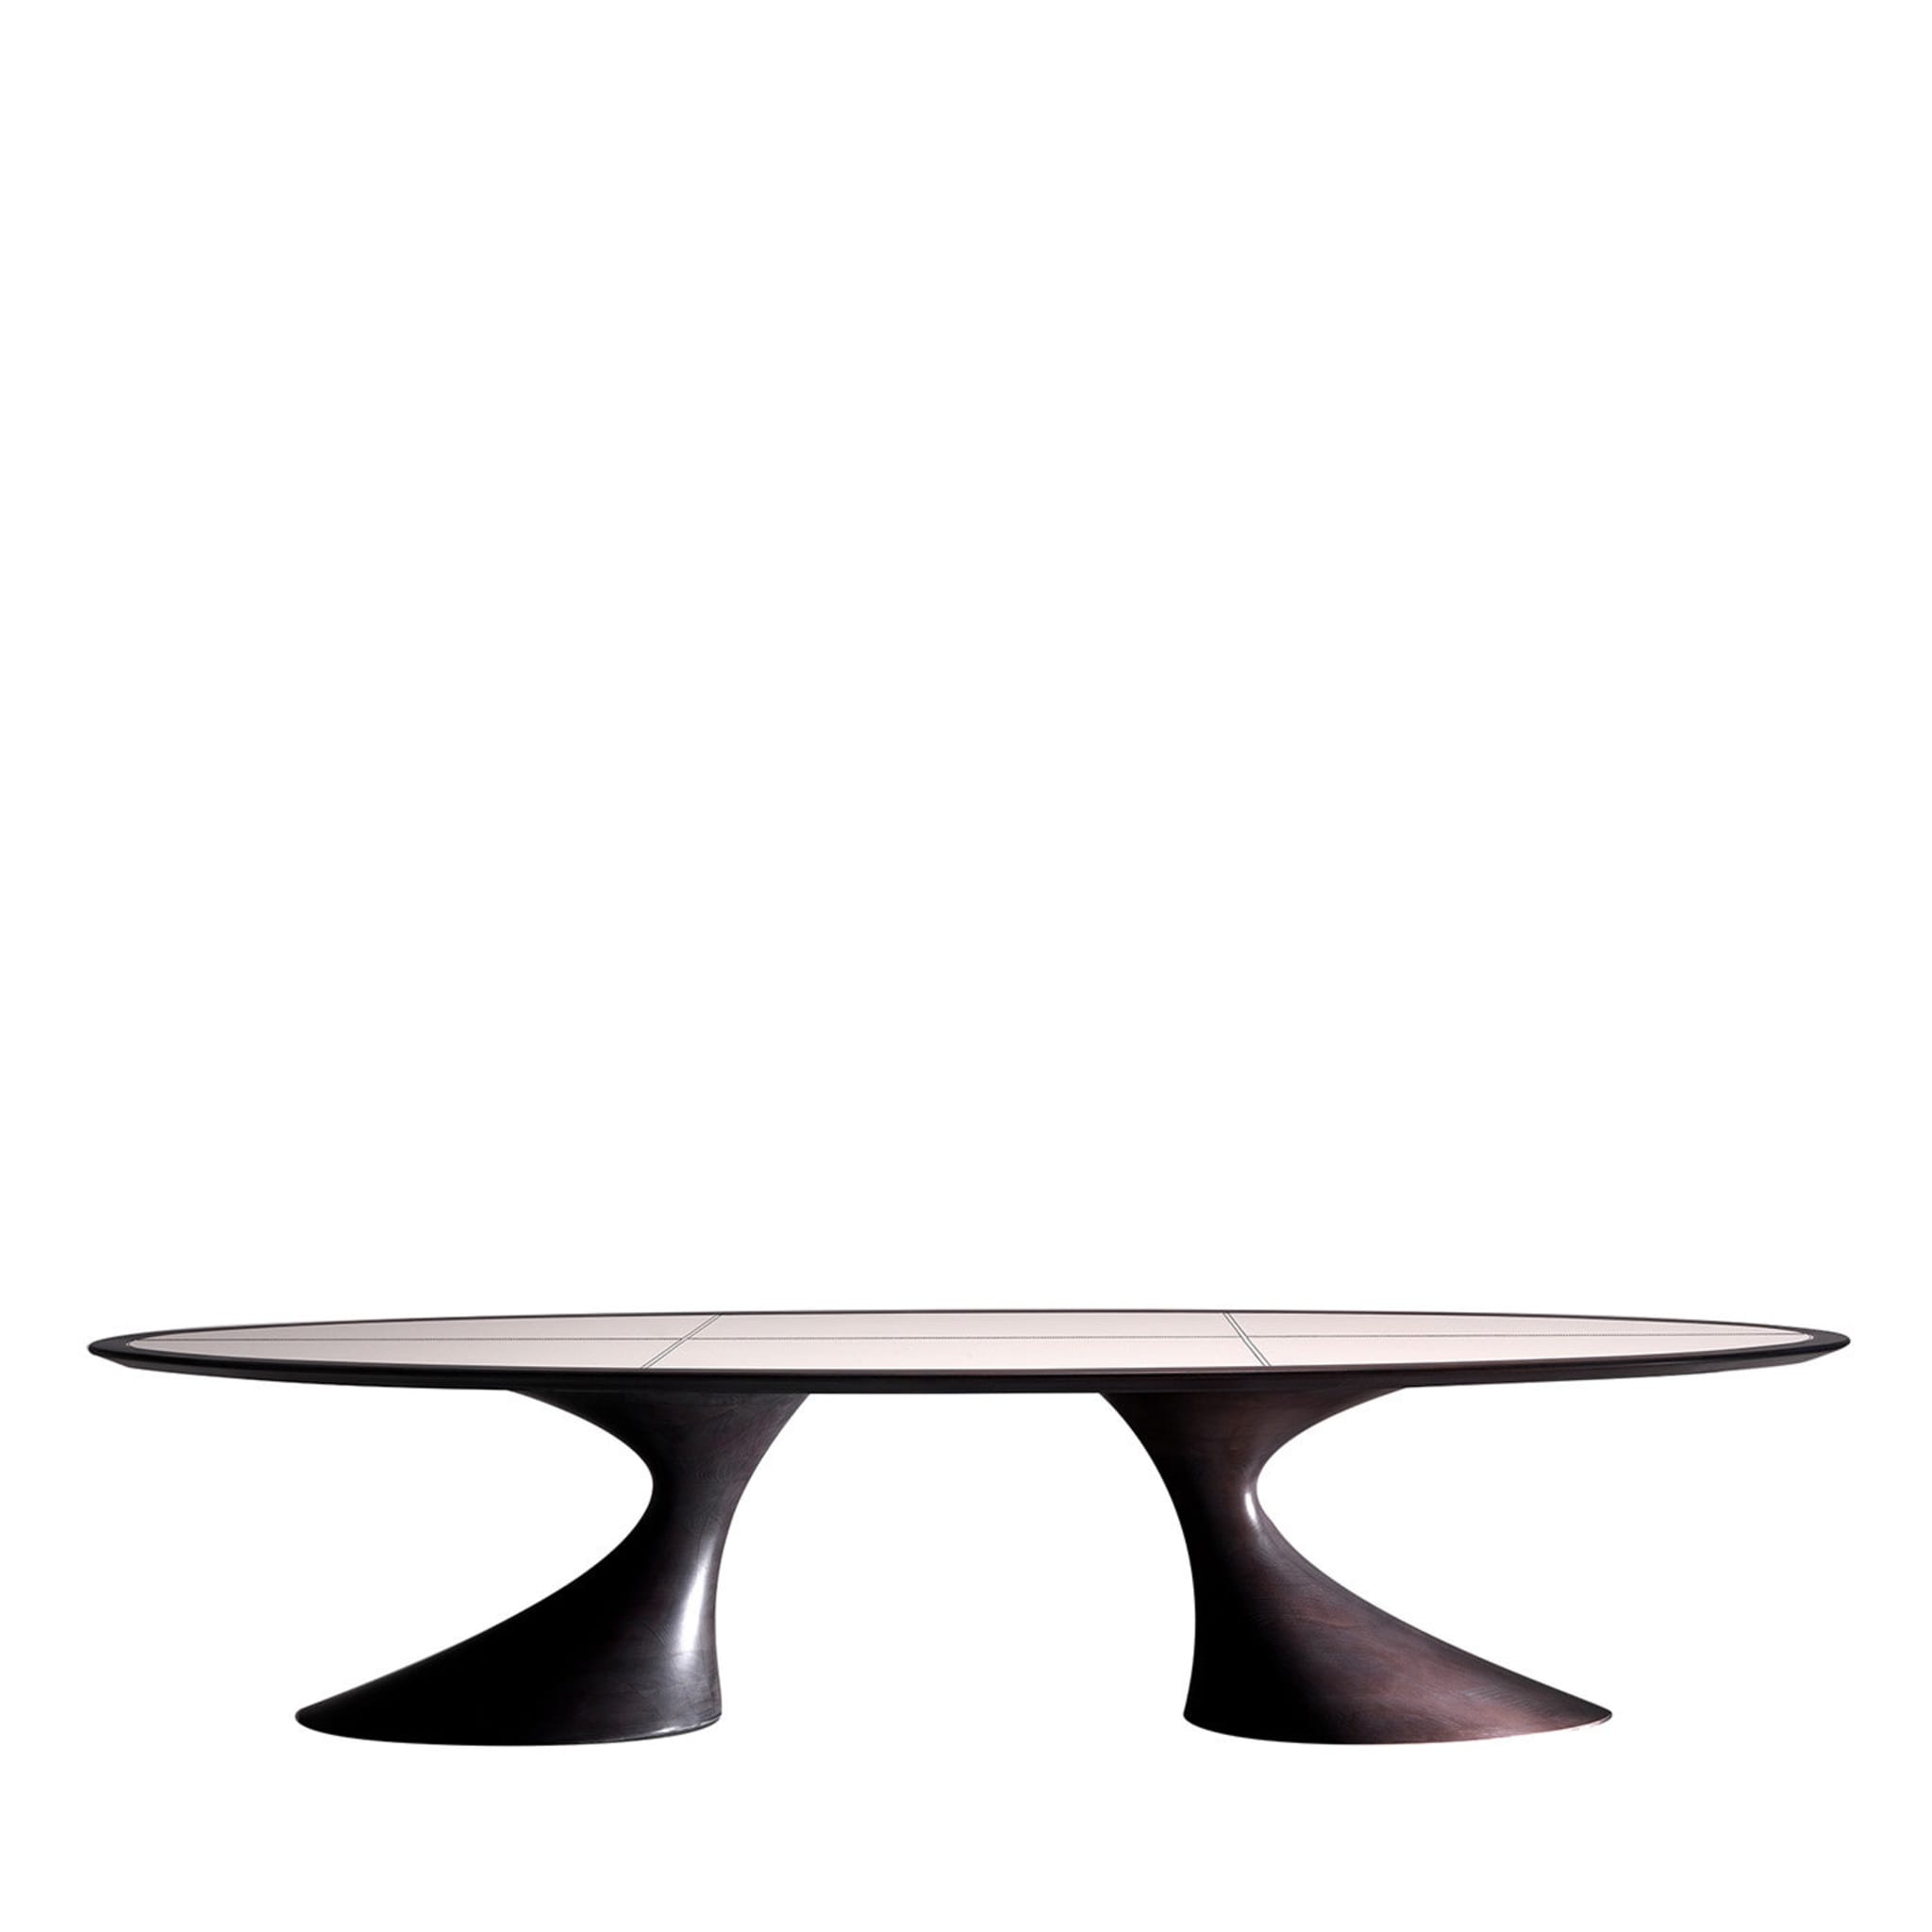 Bend Dining Table by Giovanna Azzarello - Main view